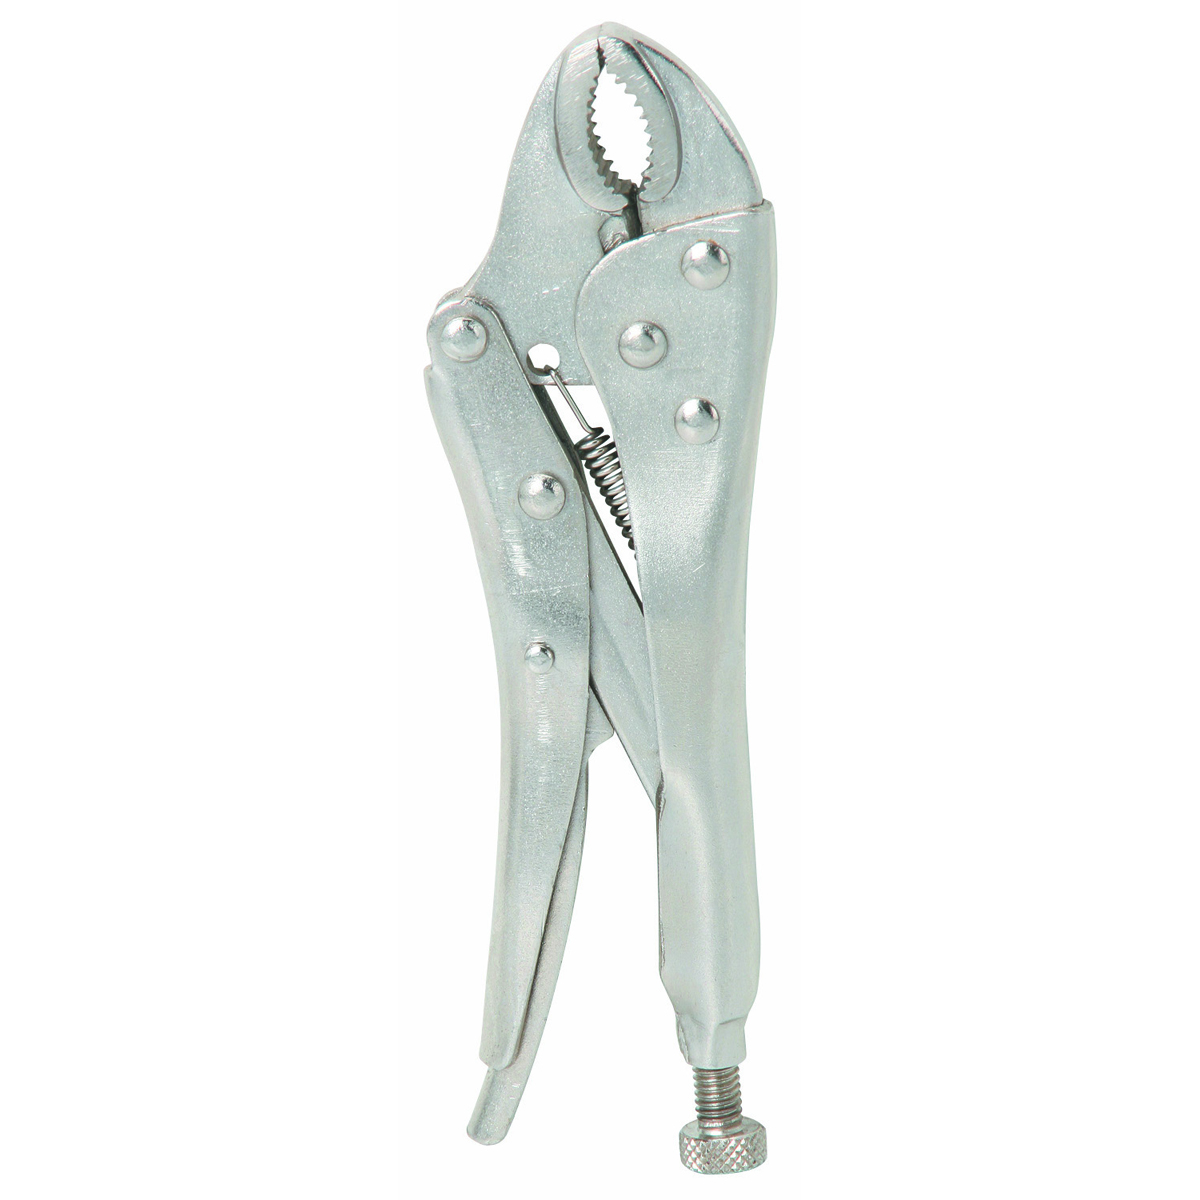 PITTSBURGH 5 in. Curved Jaw Locking Pliers - Item 39666